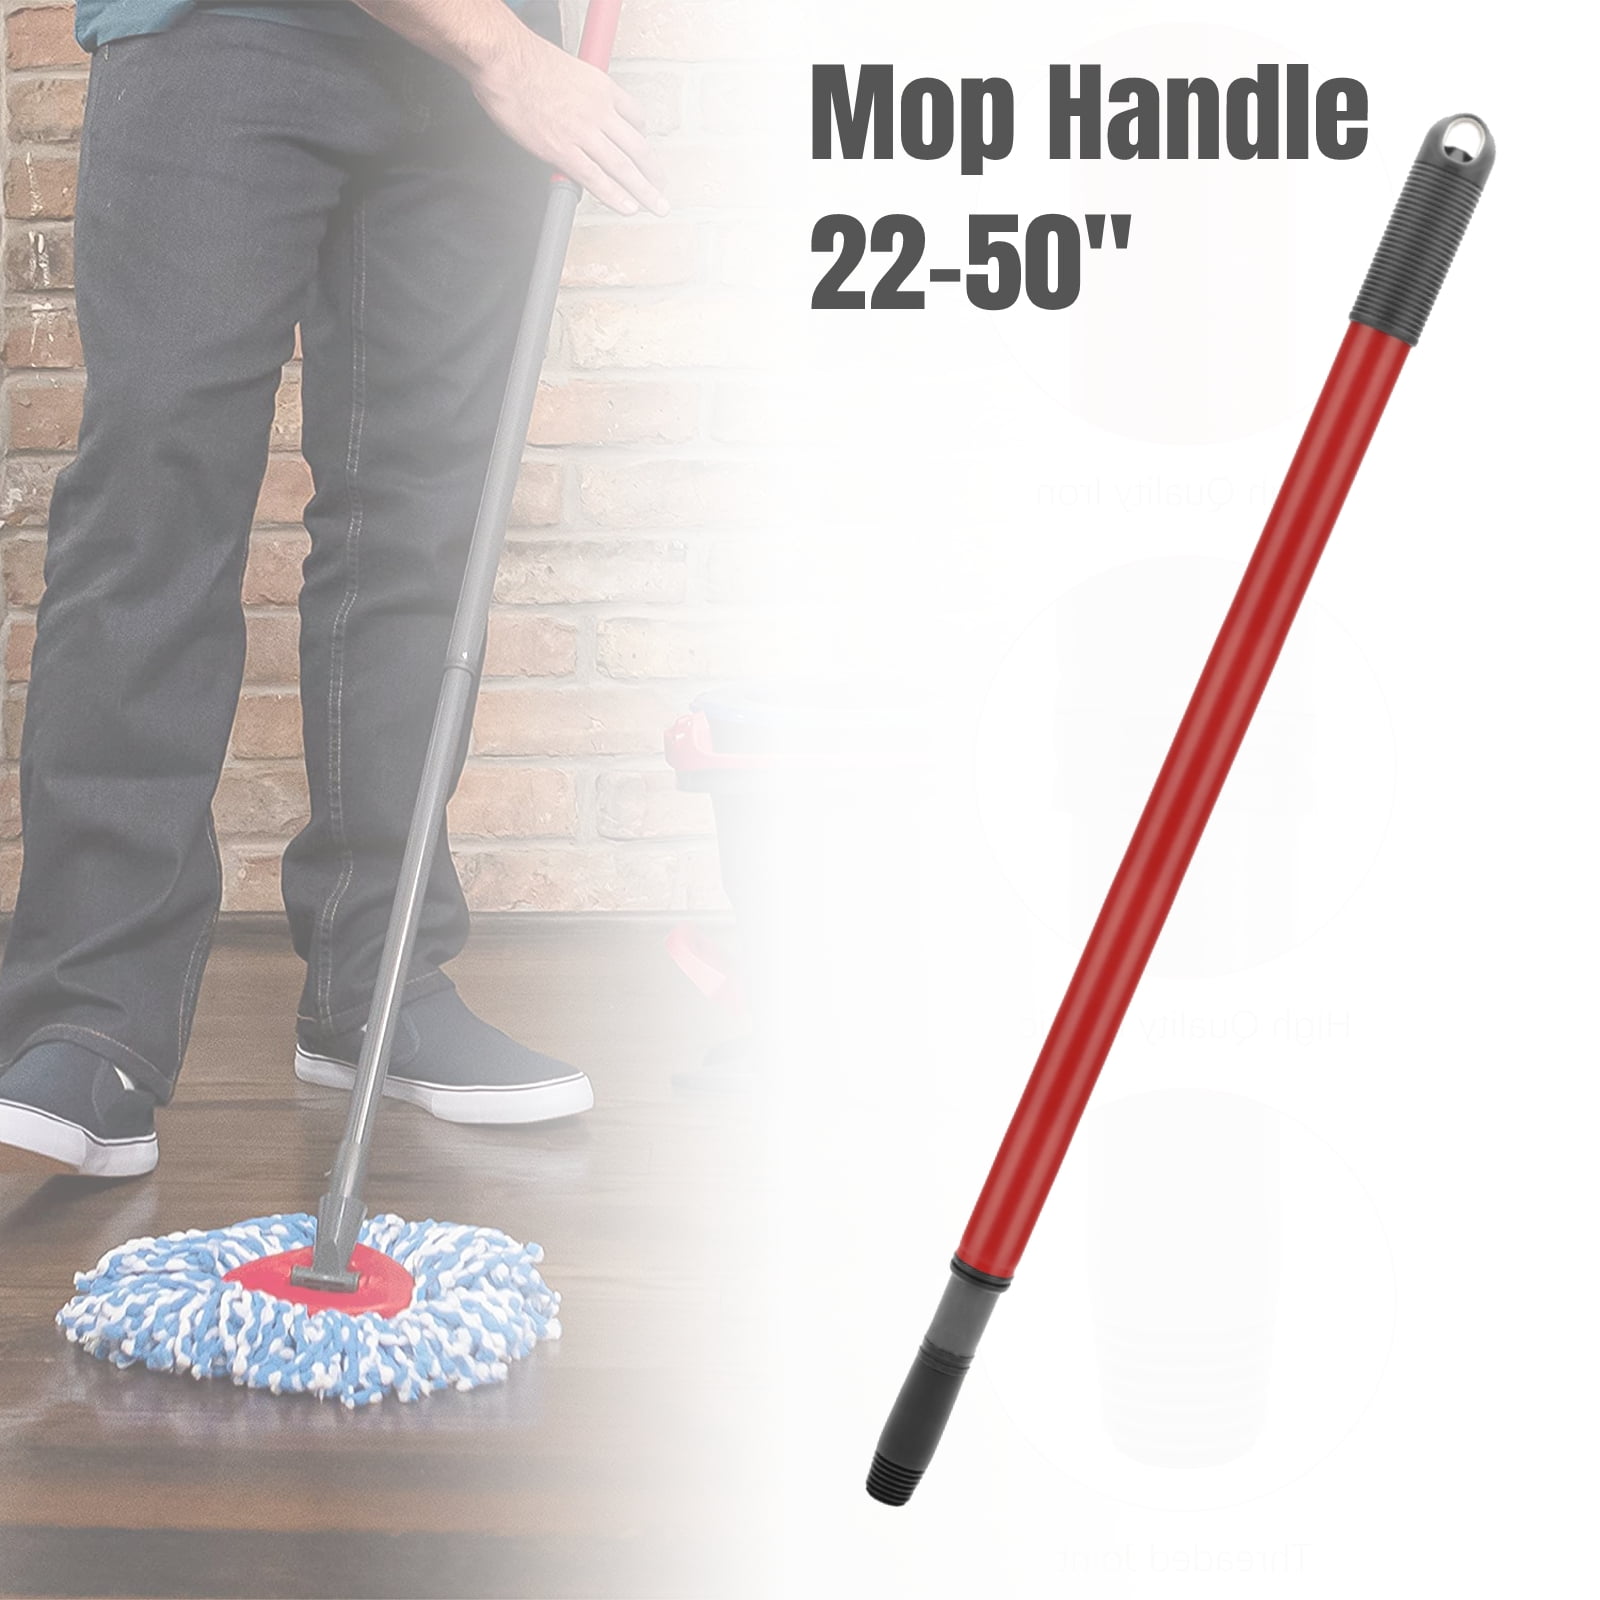 RNAB0BLGXKGCM bye-bye rags: baseboard cleaning brush, attach to broom mop  or extension pole, absorbent microfiber